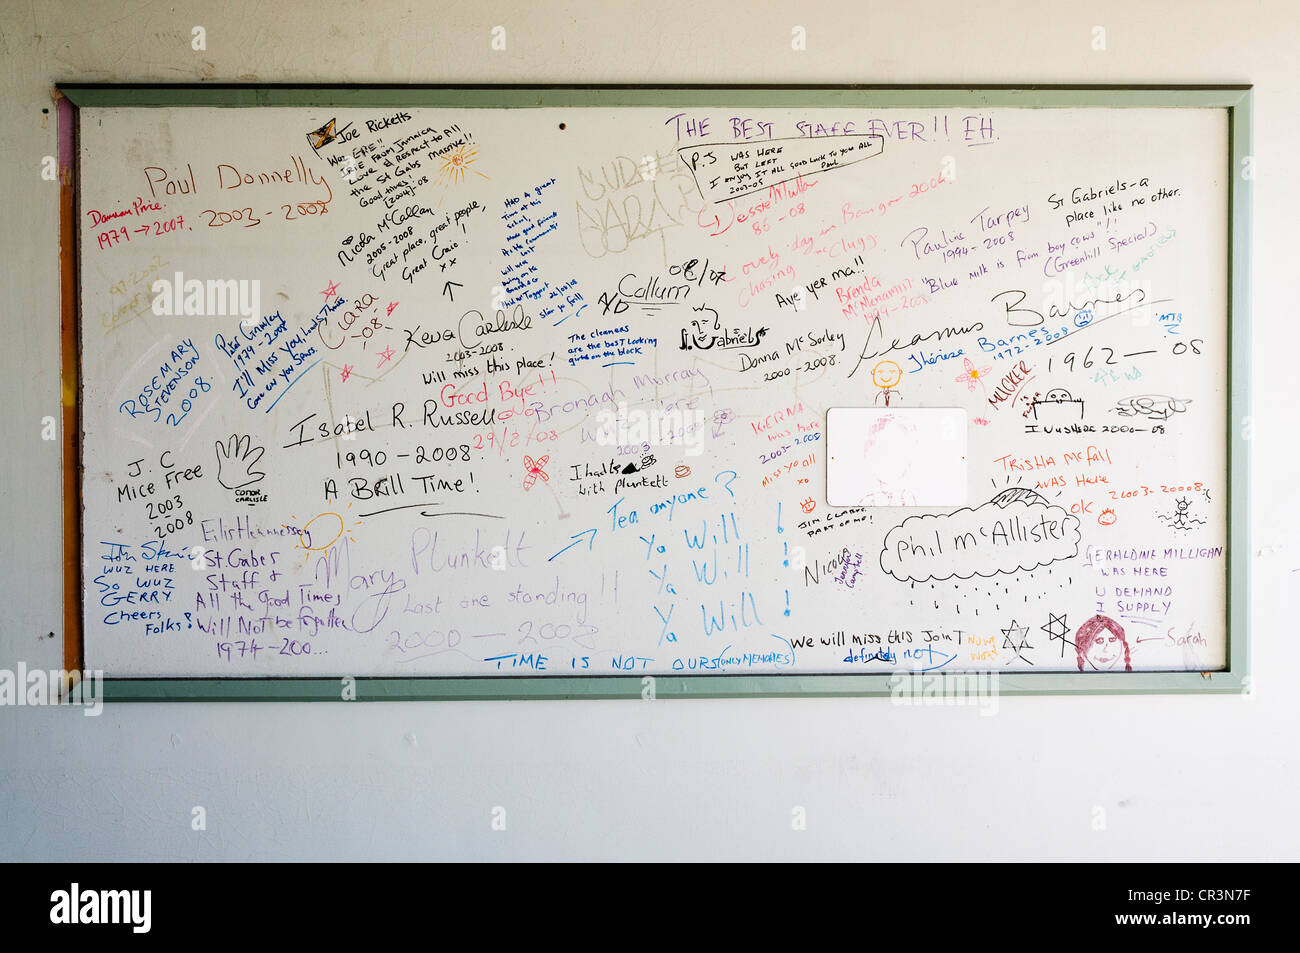 Messages left by pupils for staff and teachers on a whiteboard in school which has been closed for good due to budget cuts Stock Photo